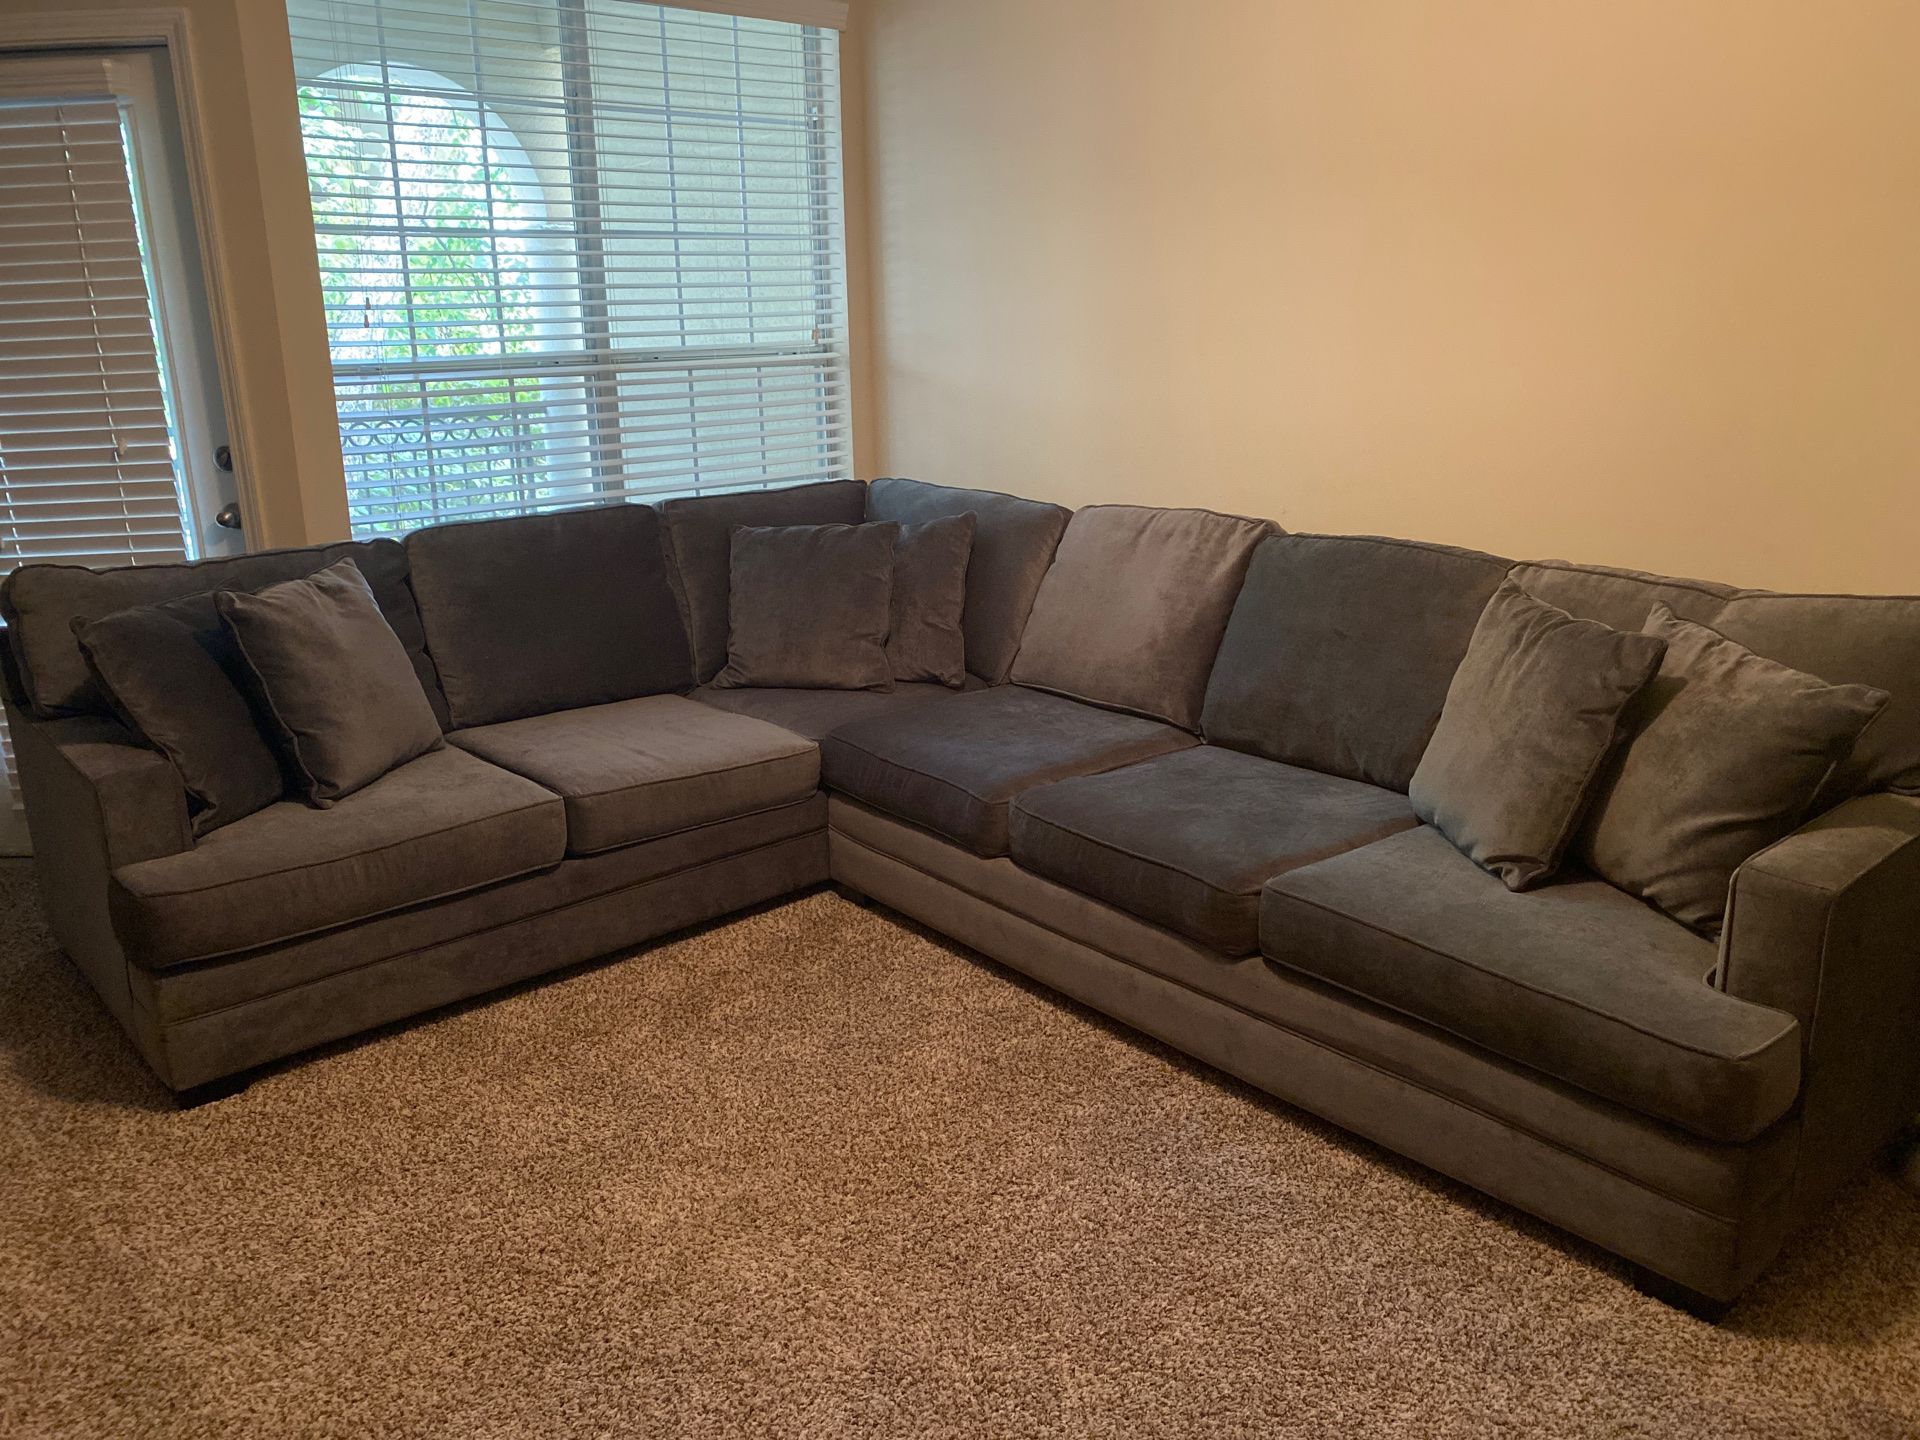 New sectional couch with 6 couch pillows